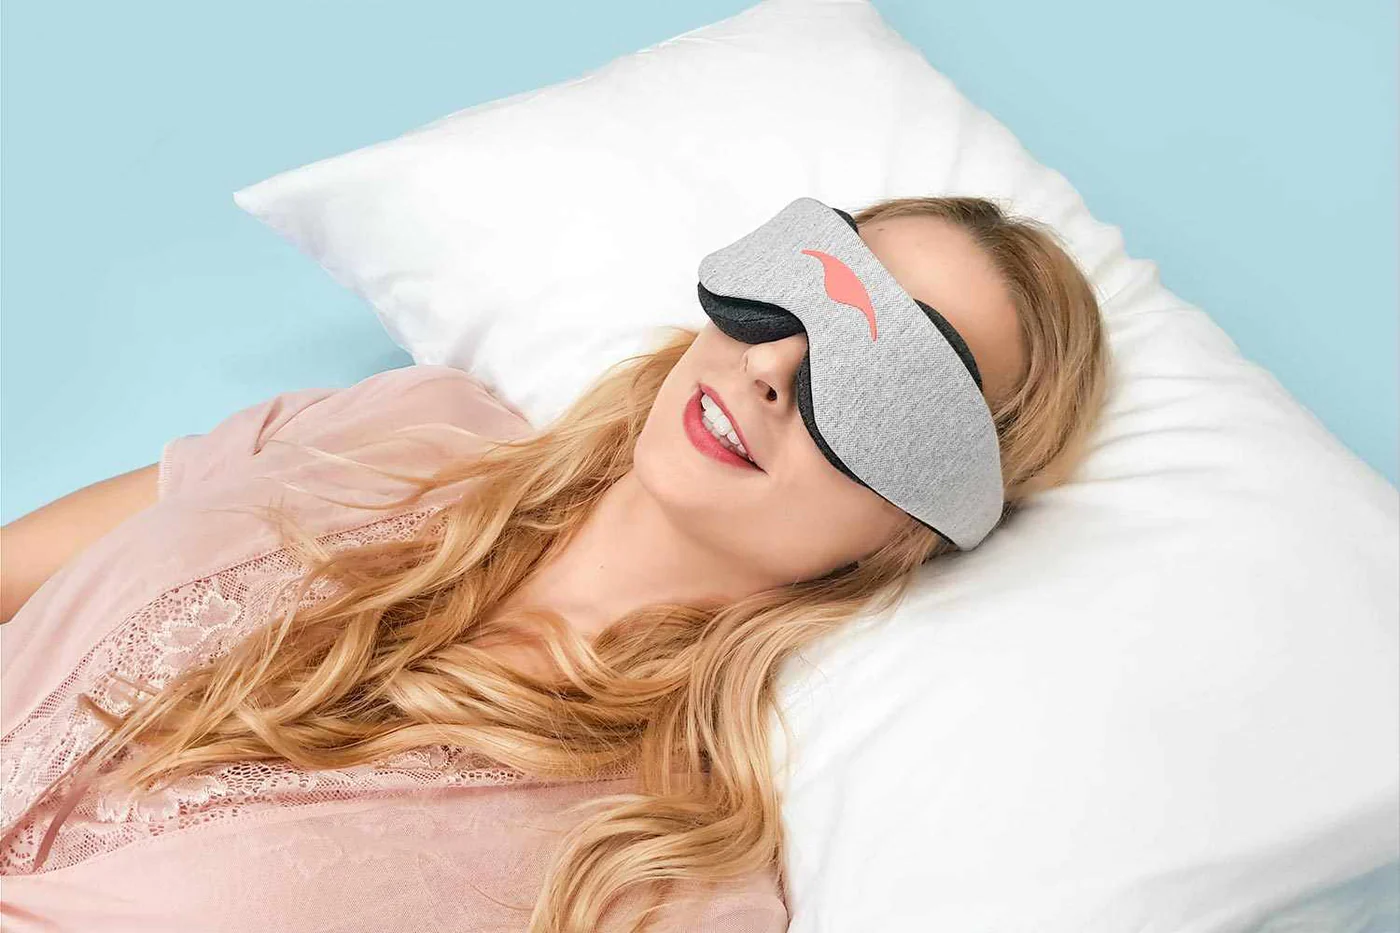 A blonde girl lying down on a pillow, wearing a gray sleep mask for snoozing at the best napping length.